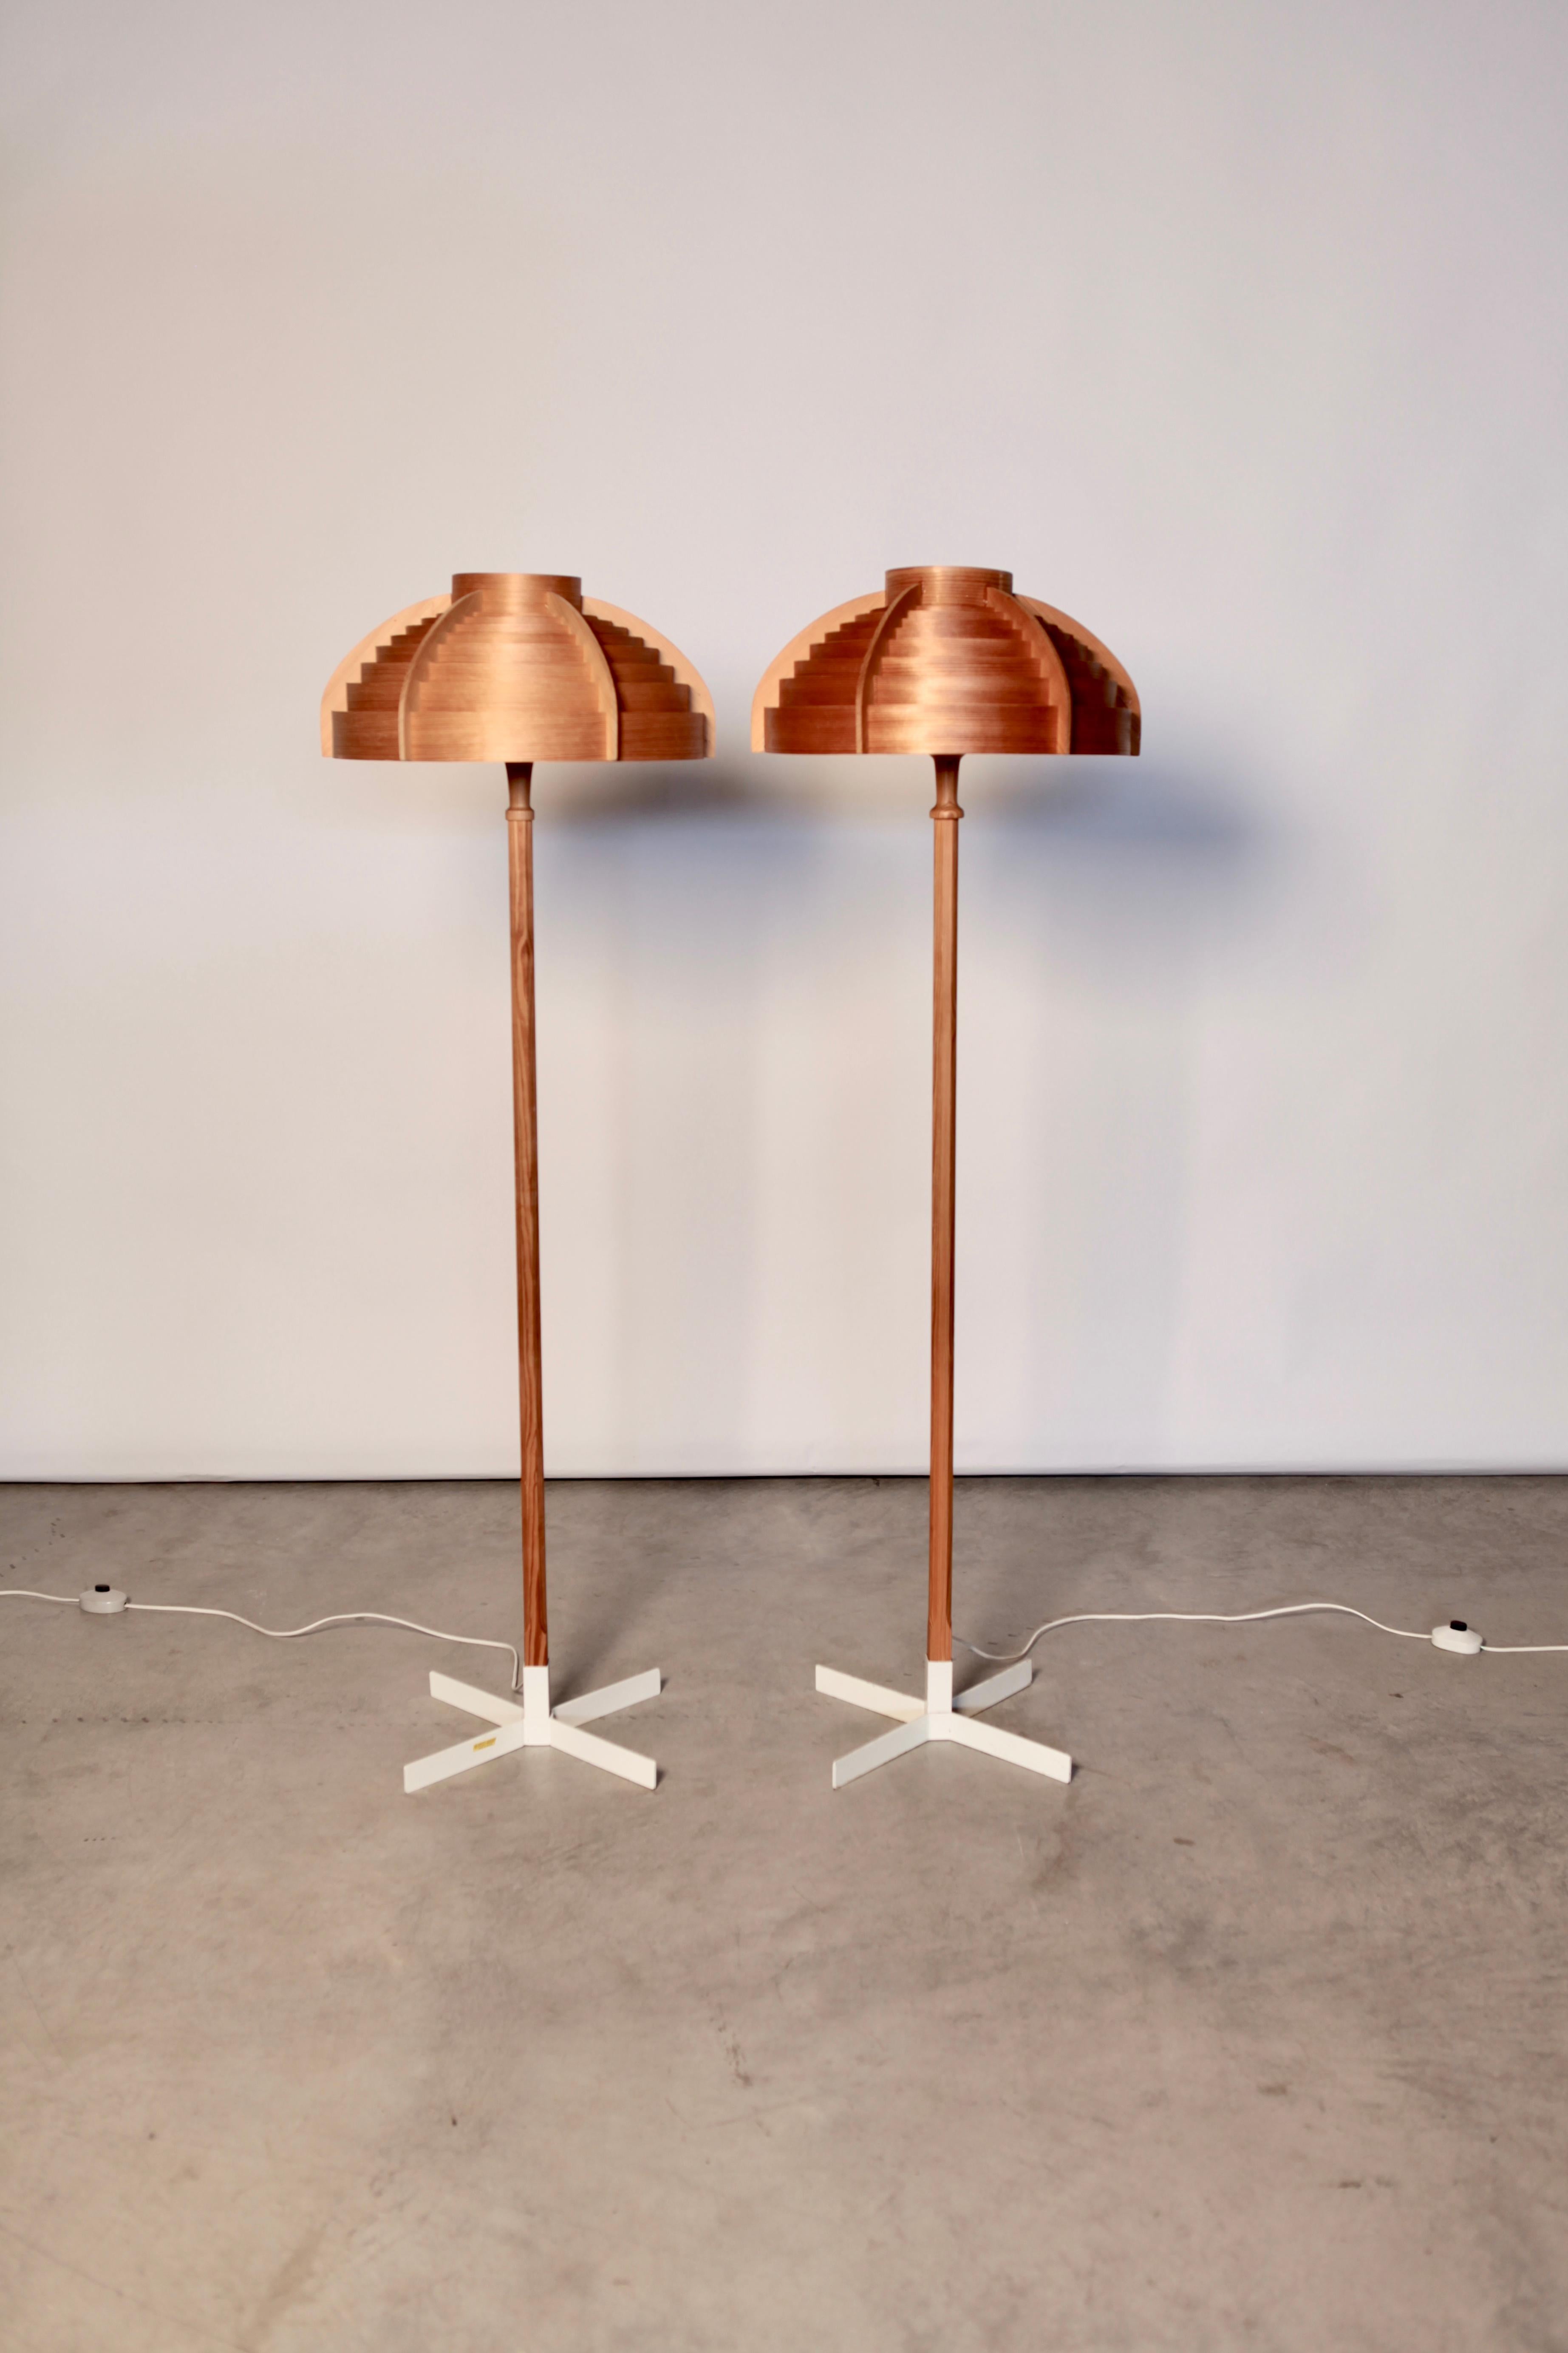 A rare pair of pine and white lacquered metal floor lamps by Hans-Agne Jakobsson, AB Ellysett Markaryd, Sweden, 1960s.
Perfect vintage condition.